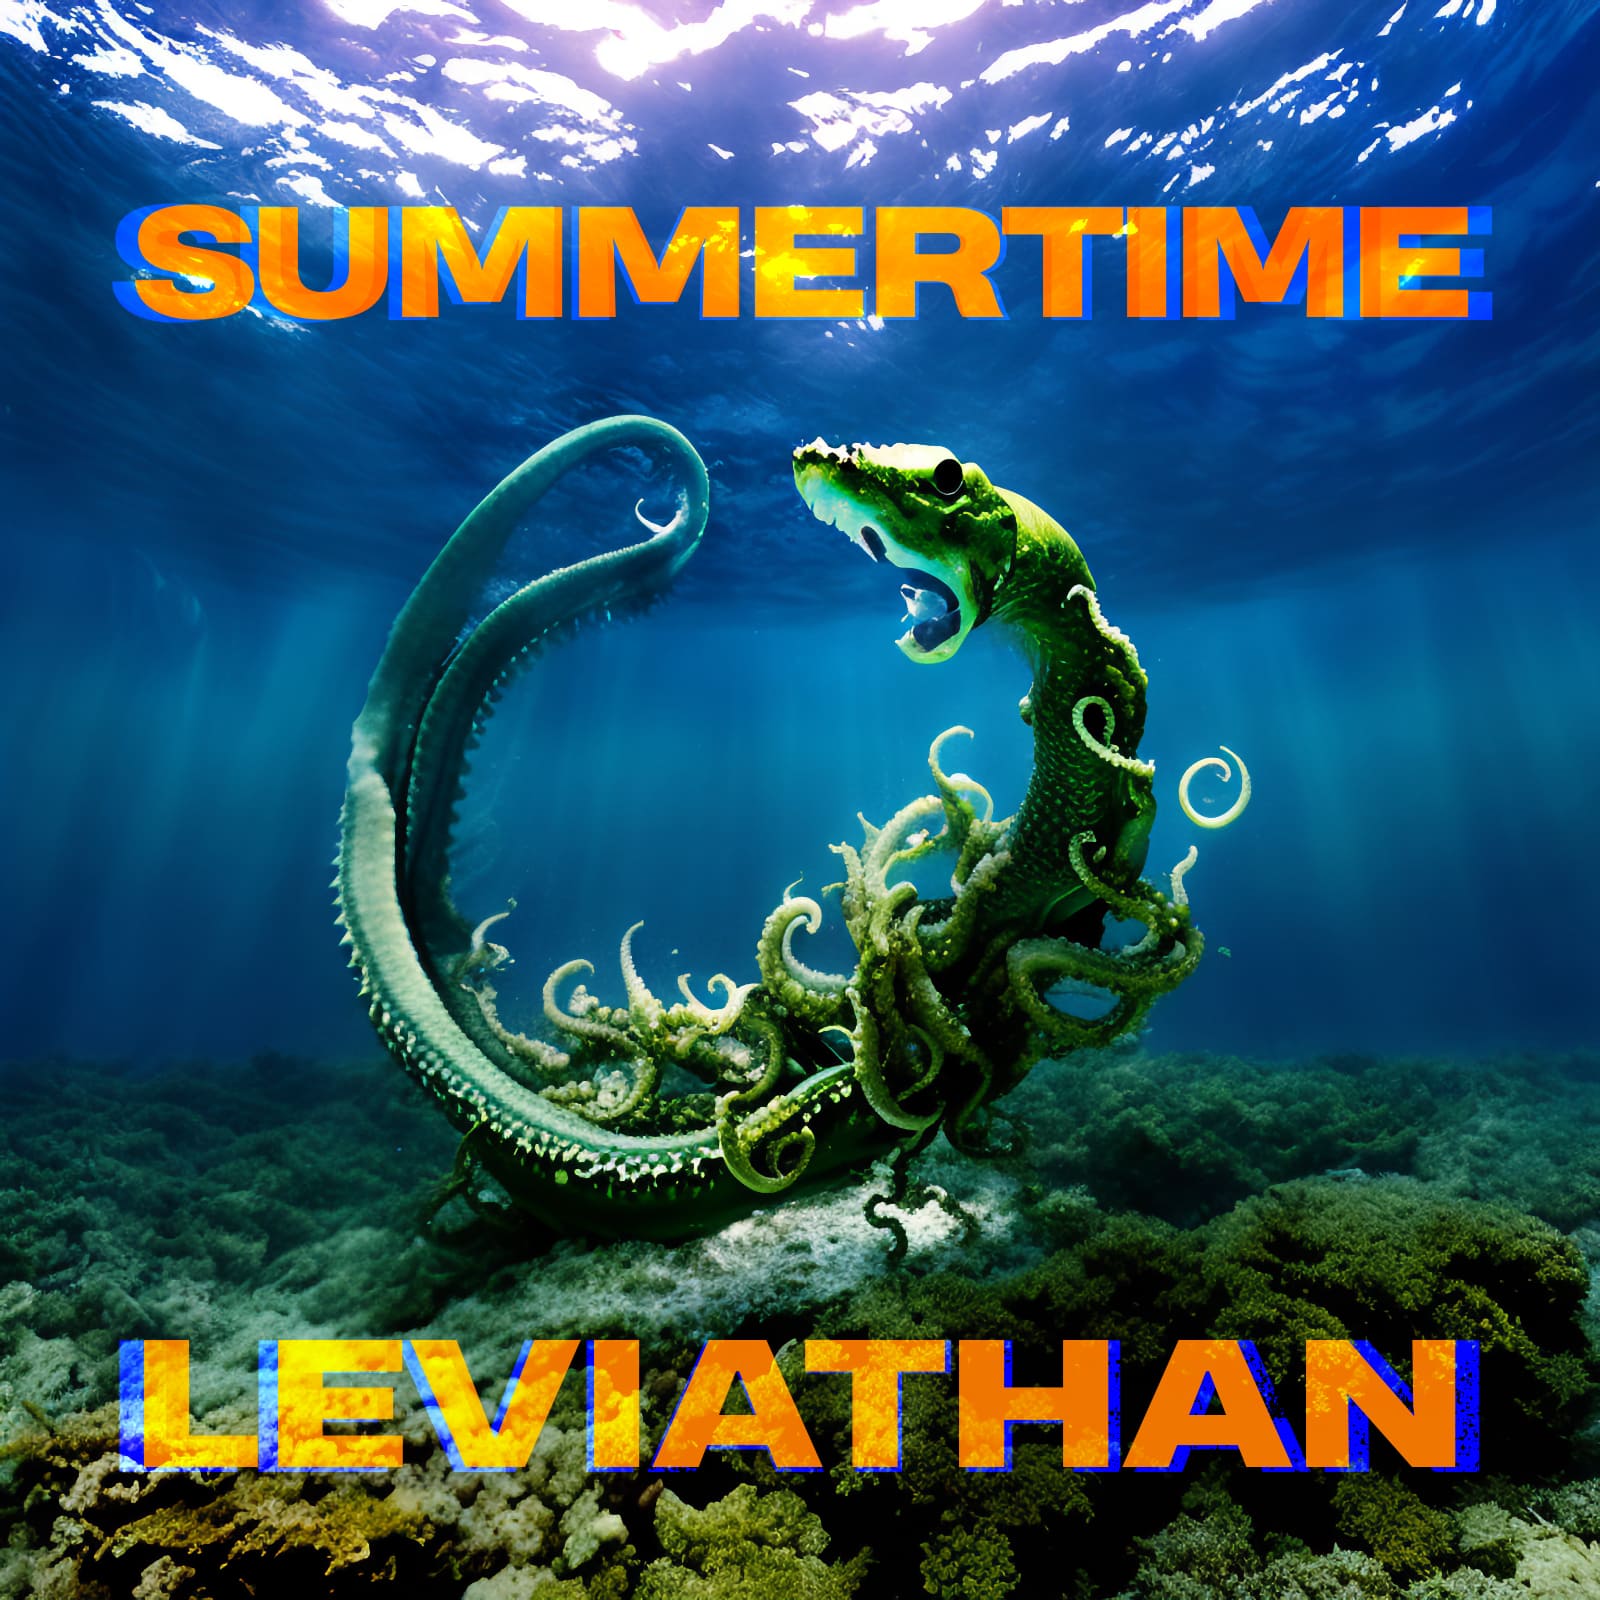 tbc aka Instamatic - Summertime Leviathan (Ella Fitzgerald & Louis Armstrong vs Everything Everything) mashup cover - Summer Booty 2023